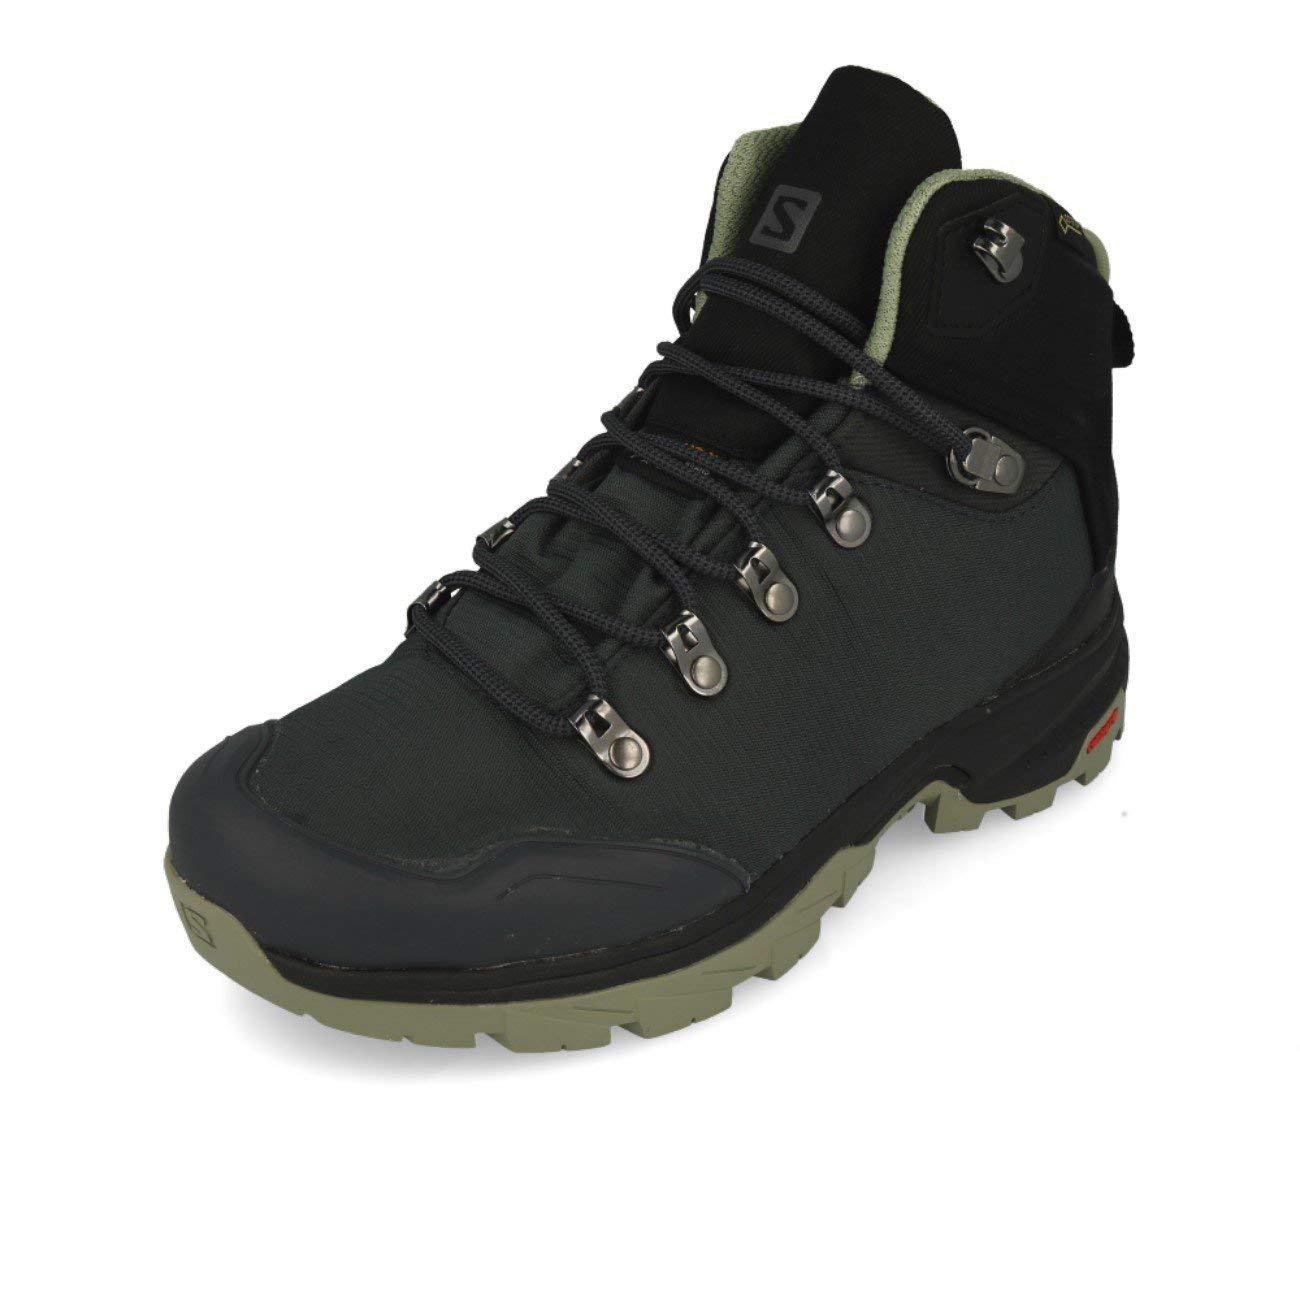 Salomon Outback 500 Gtx Backpacking Boots in Black | Lyst